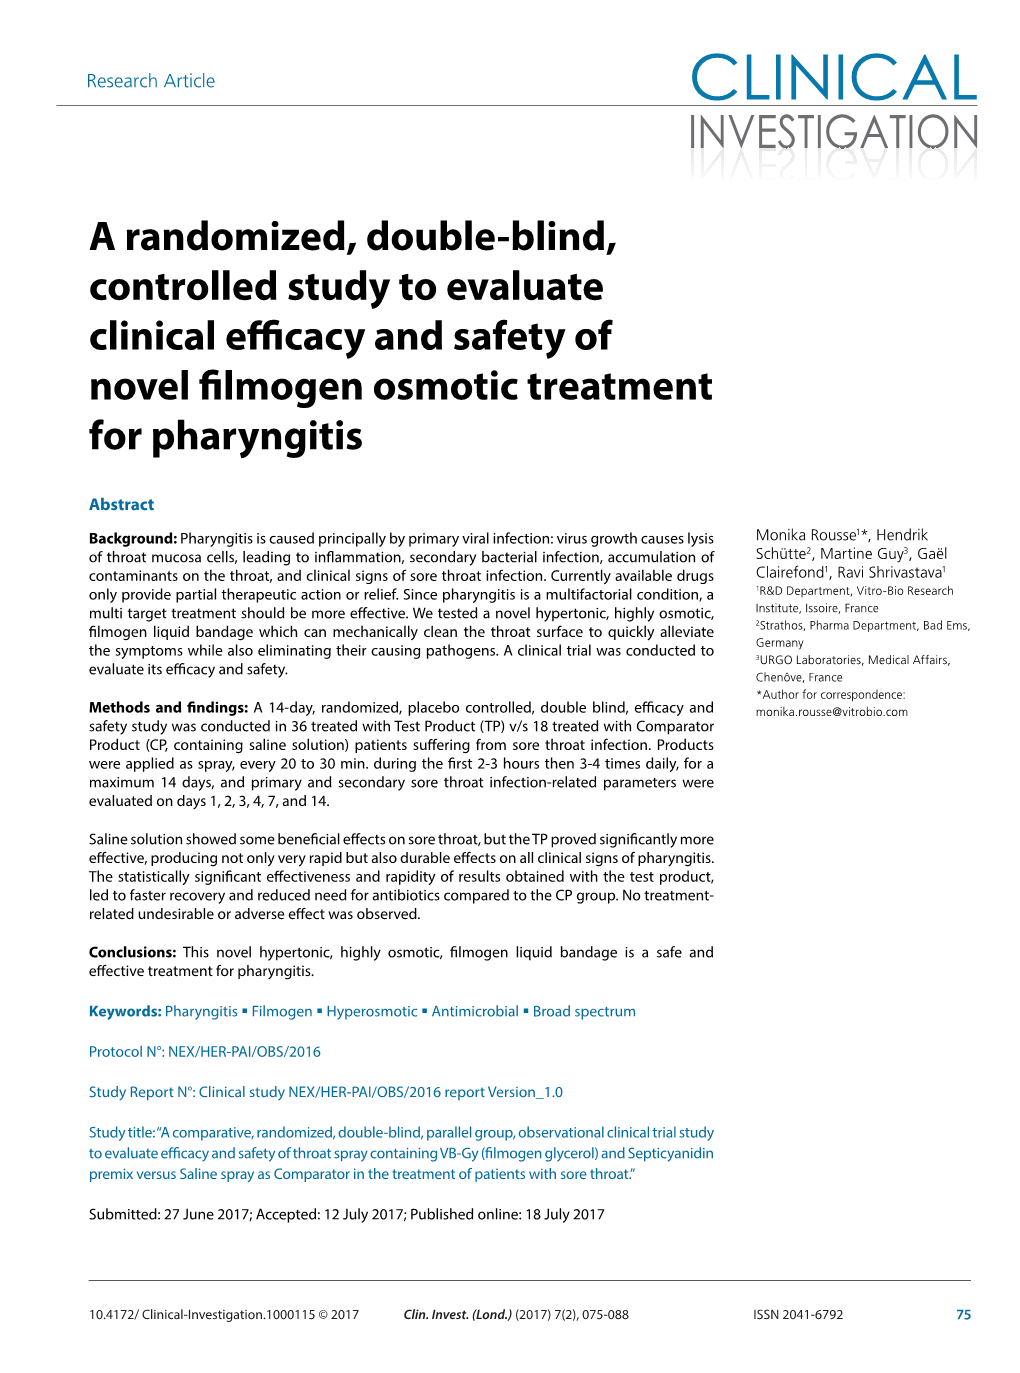 A Randomized, Double-Blind, Controlled Study to Evaluate Clinical Efficacy and Safety of Novel Filmogen Osmotic Treatment for Pharyngitis